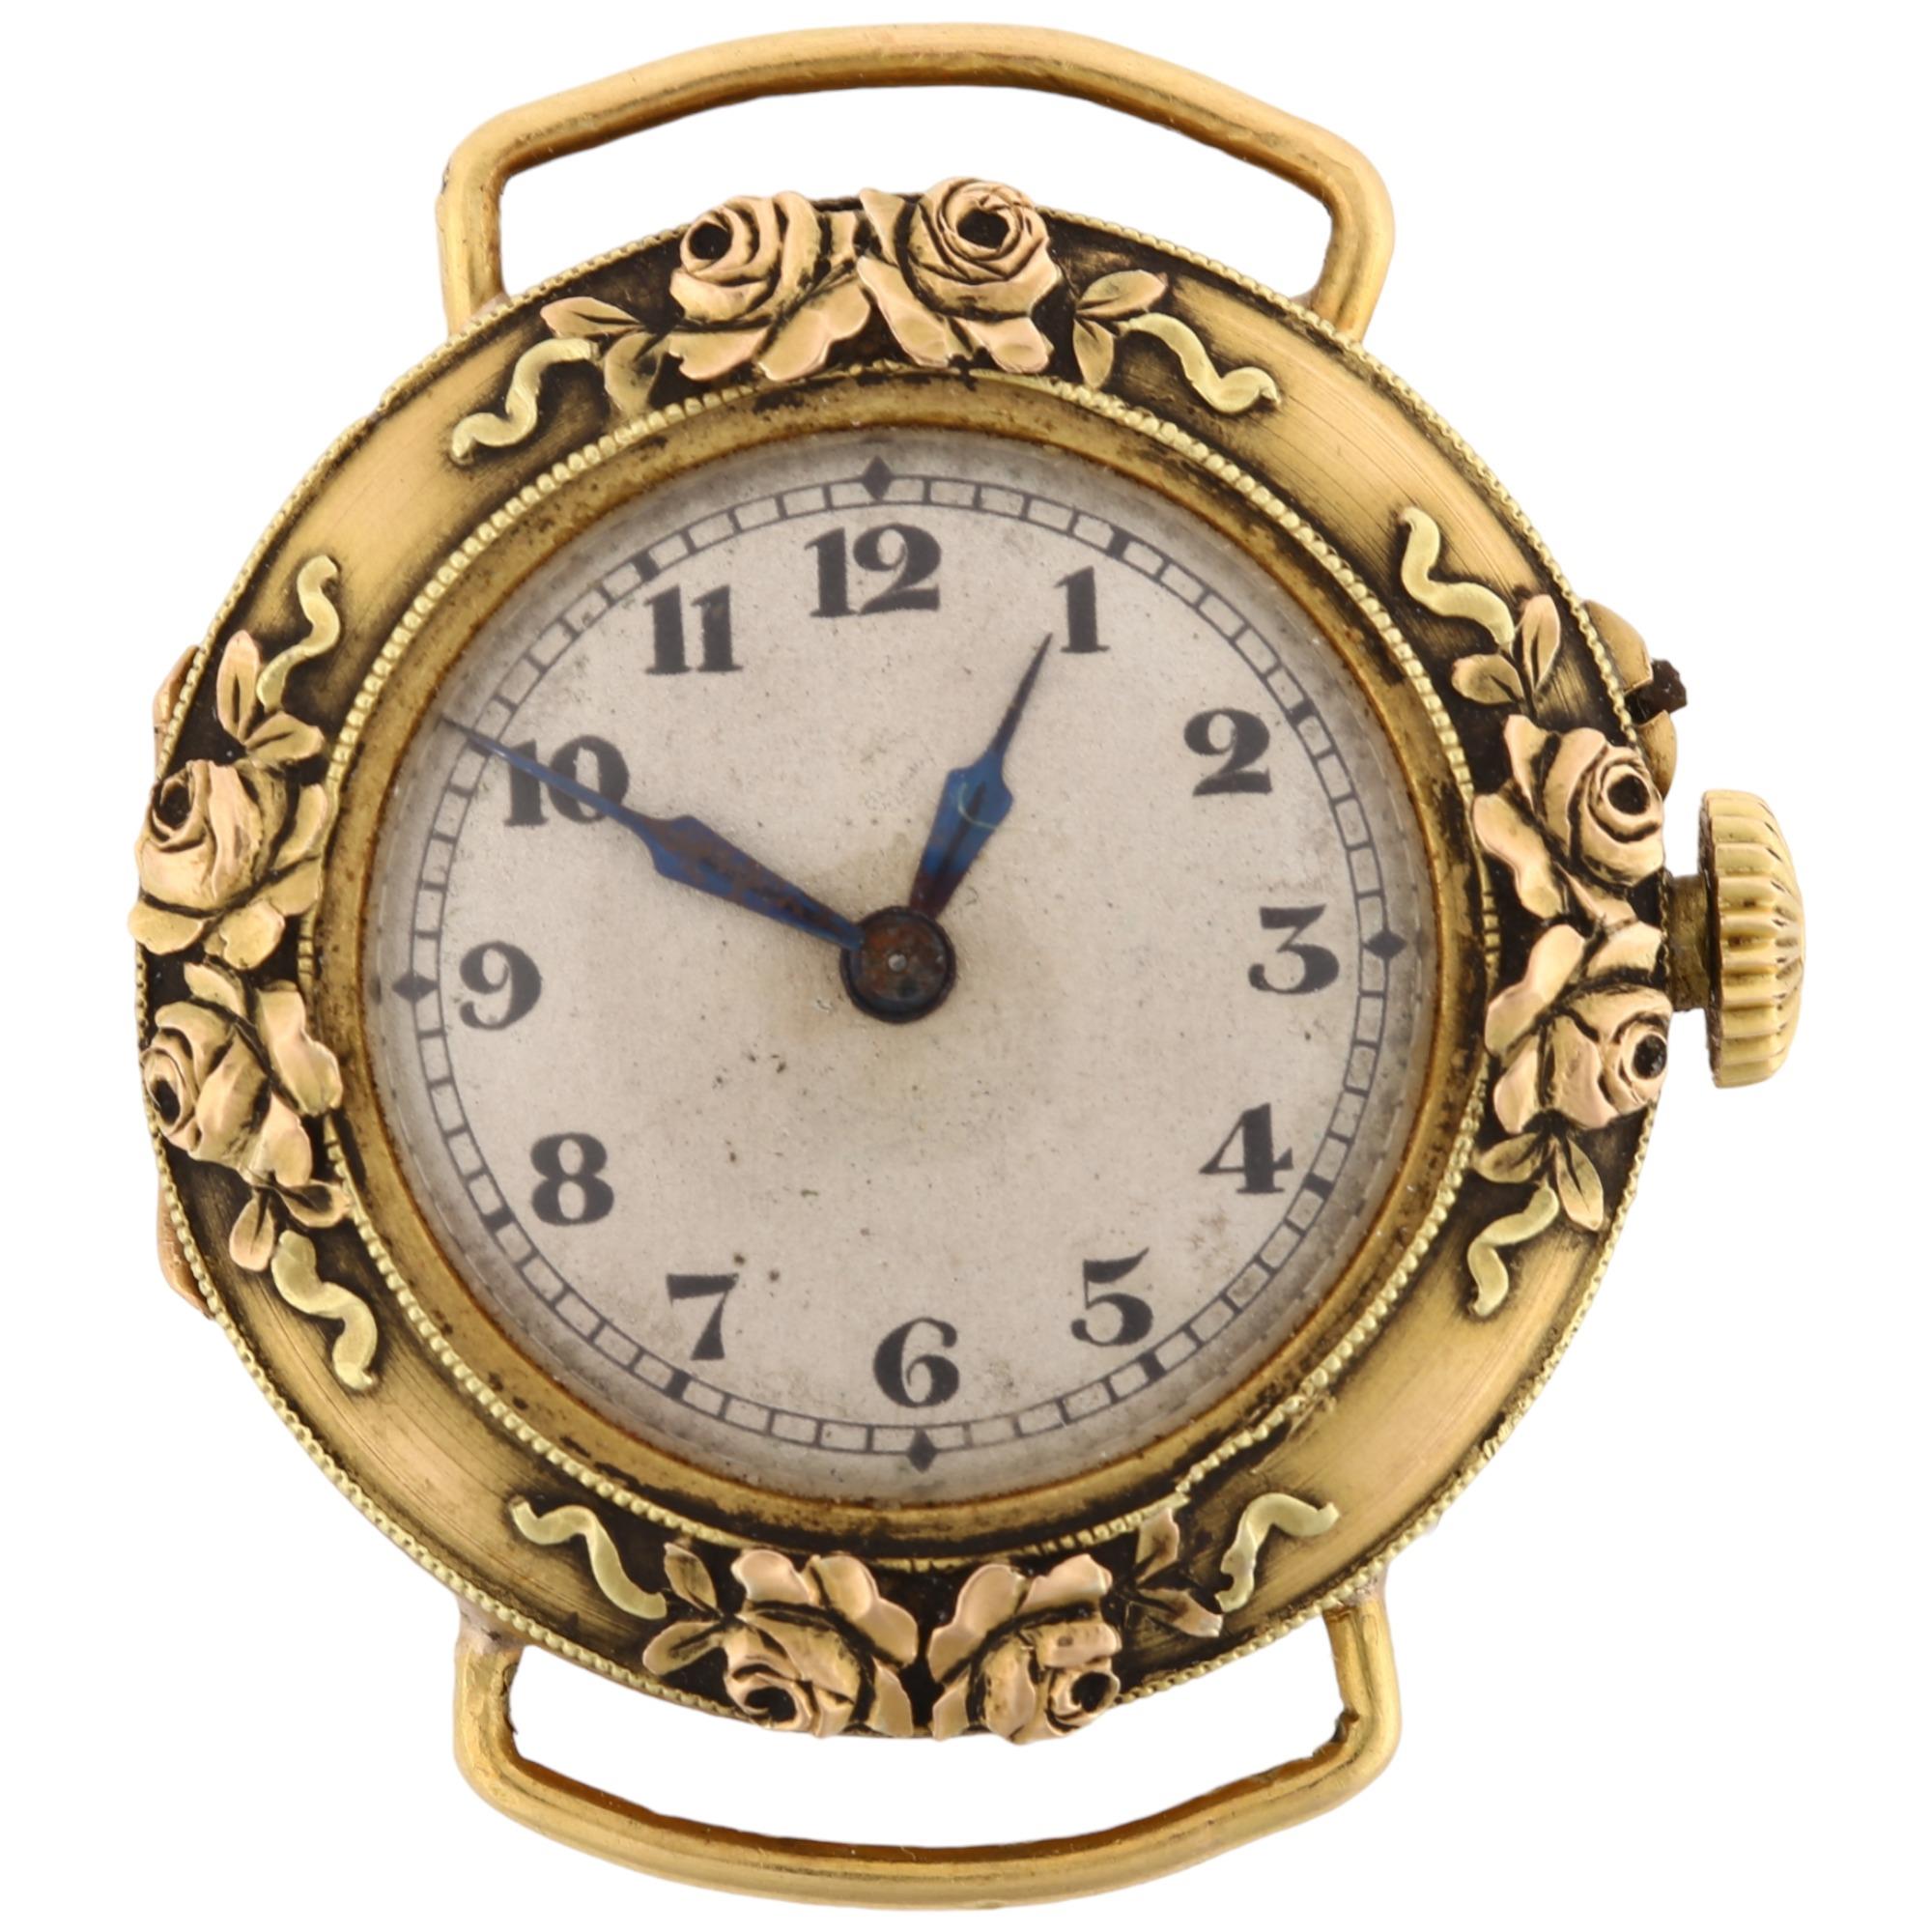 An Art Nouveau French 18k gold mechanical wristwatch head, by Schlussel G, silvered dial with Arabic